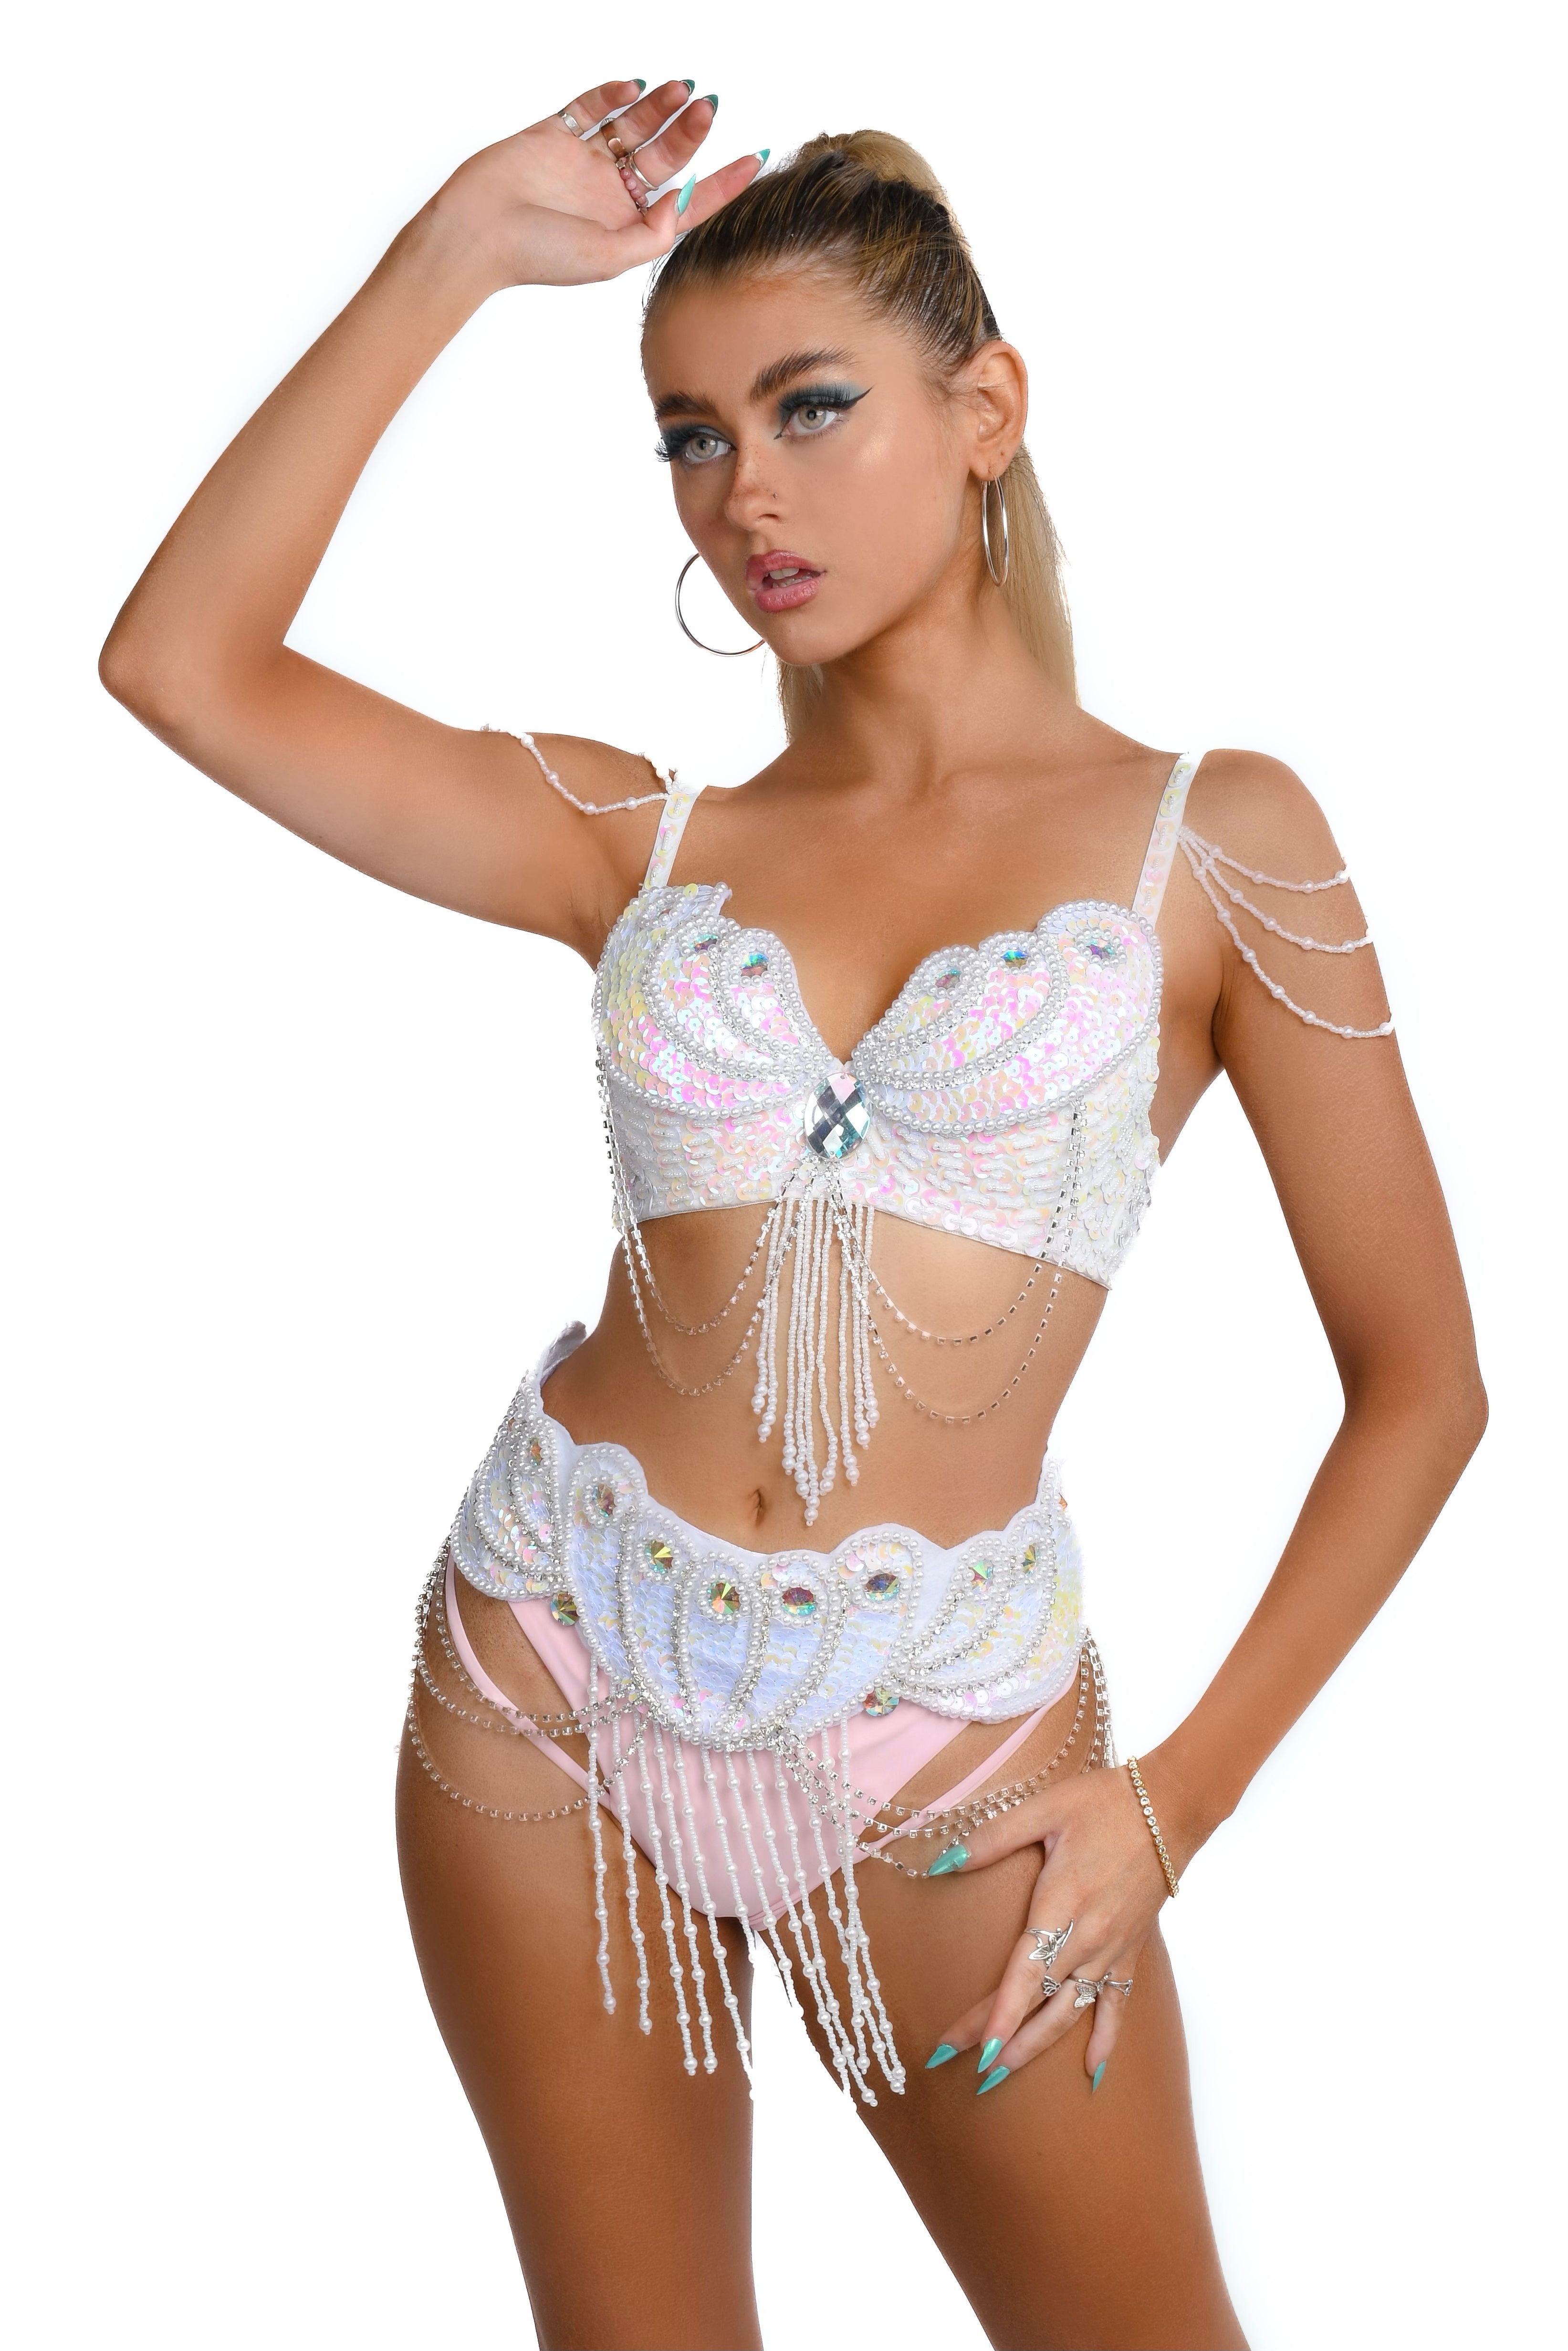 Pearl Mermaid Carnival Bra Rave clothes,rave outfits,edc outfits,rave – THE  LUMI SHOP